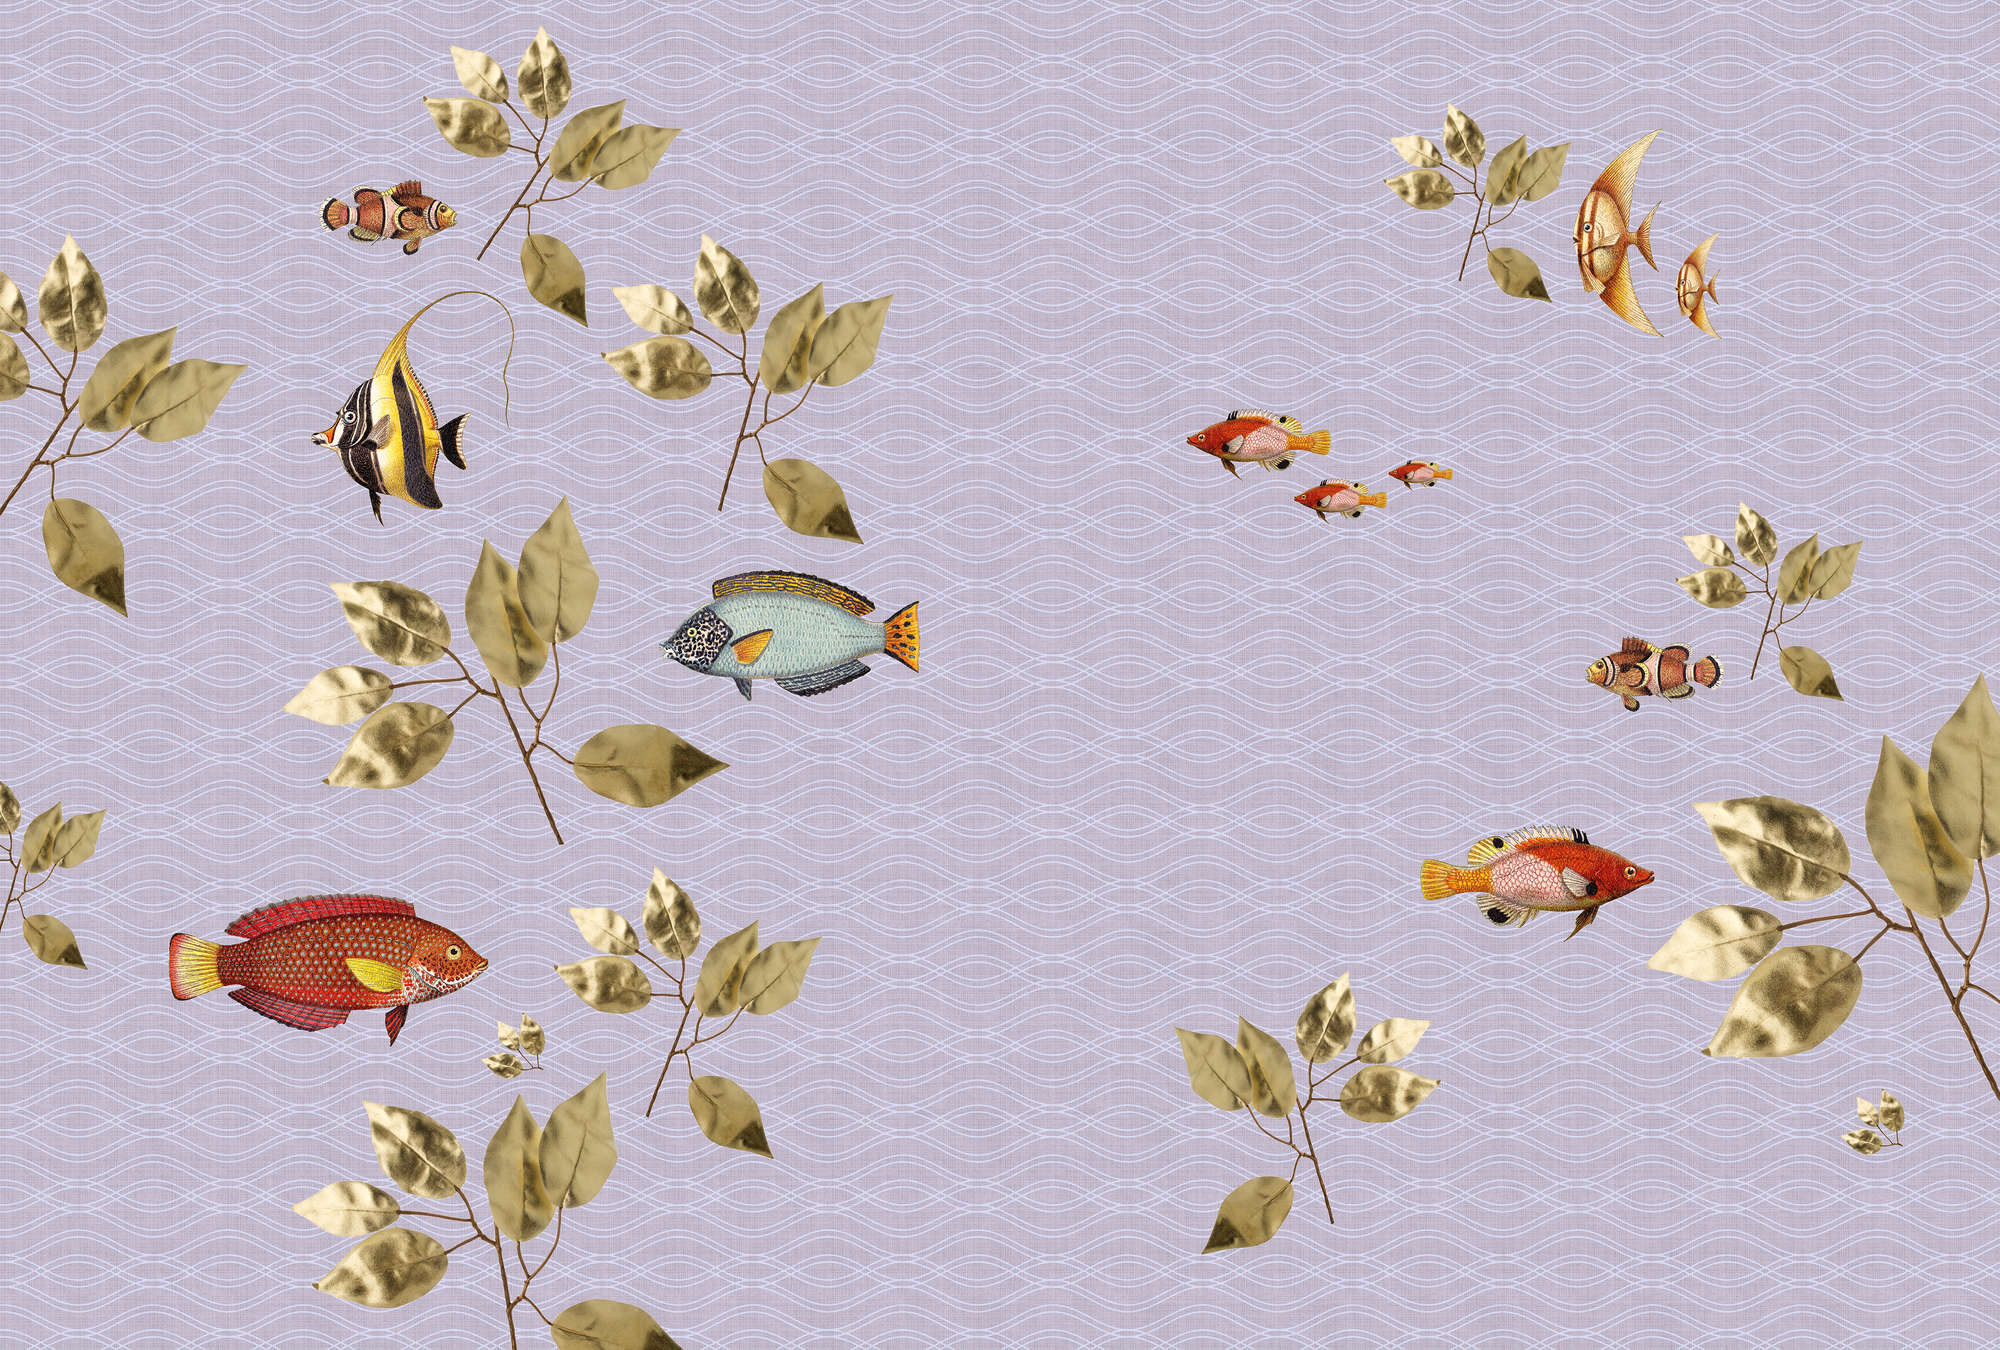             Brilliant fish 2 - Fish wallpaper in natural linen structure with modern style mix - Violet | mother-of-pearl smooth fleece
        